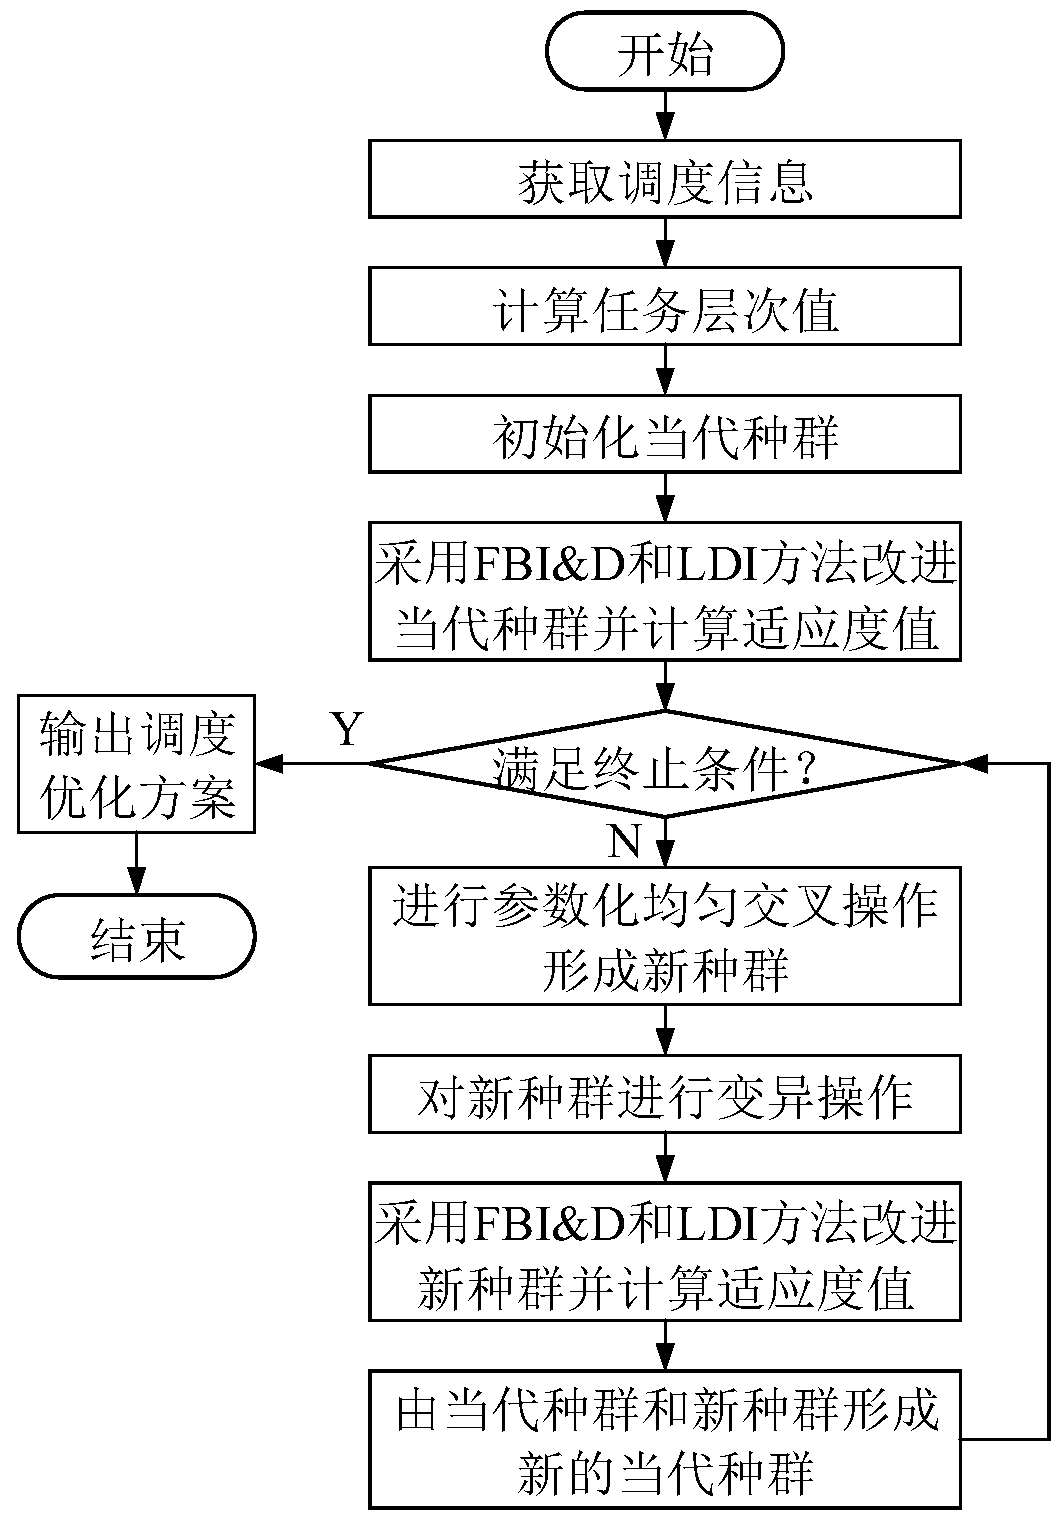 Cloud workflow scheduling optimization method based on two-dimensional coding genetic algorithm